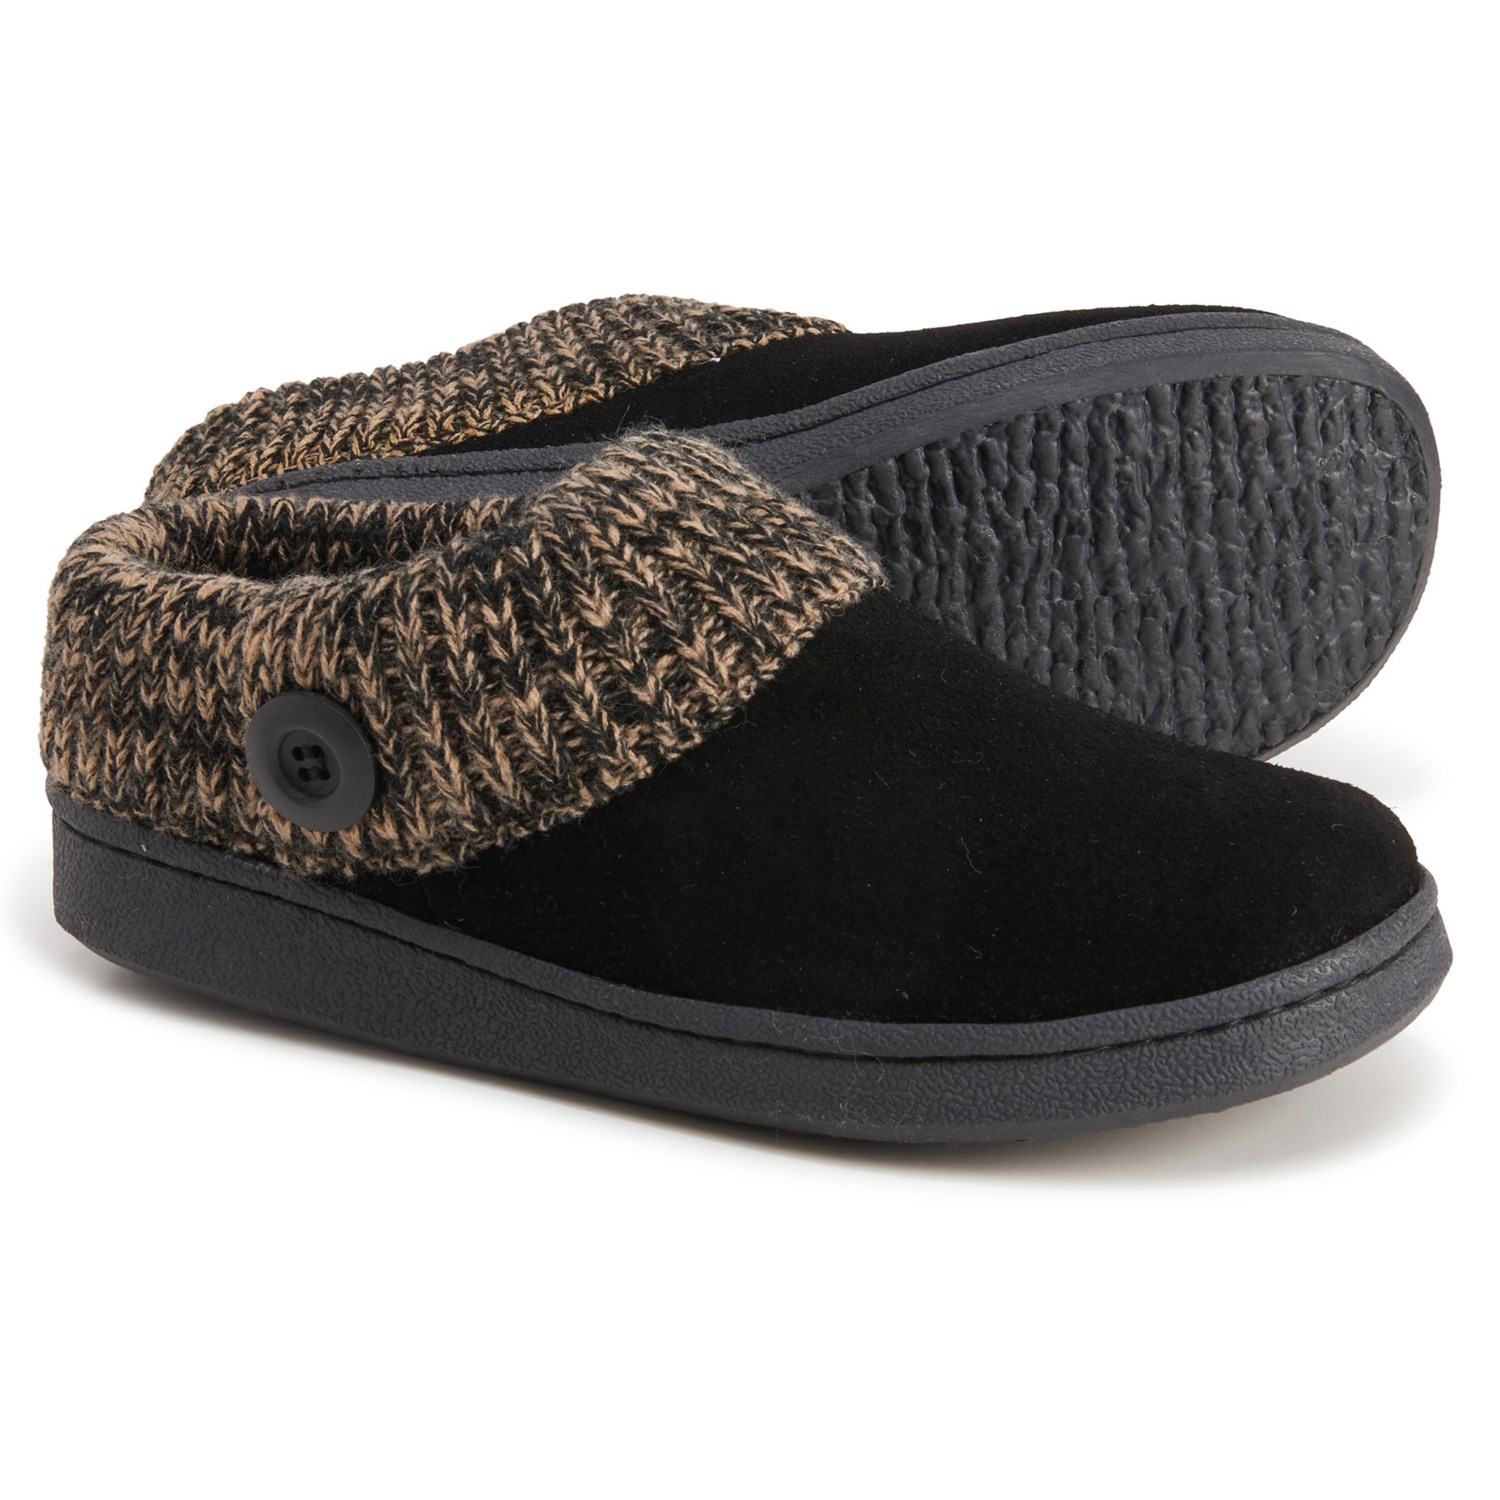 Clarks Knit Scuff Slippers (For Women) - Save 70%